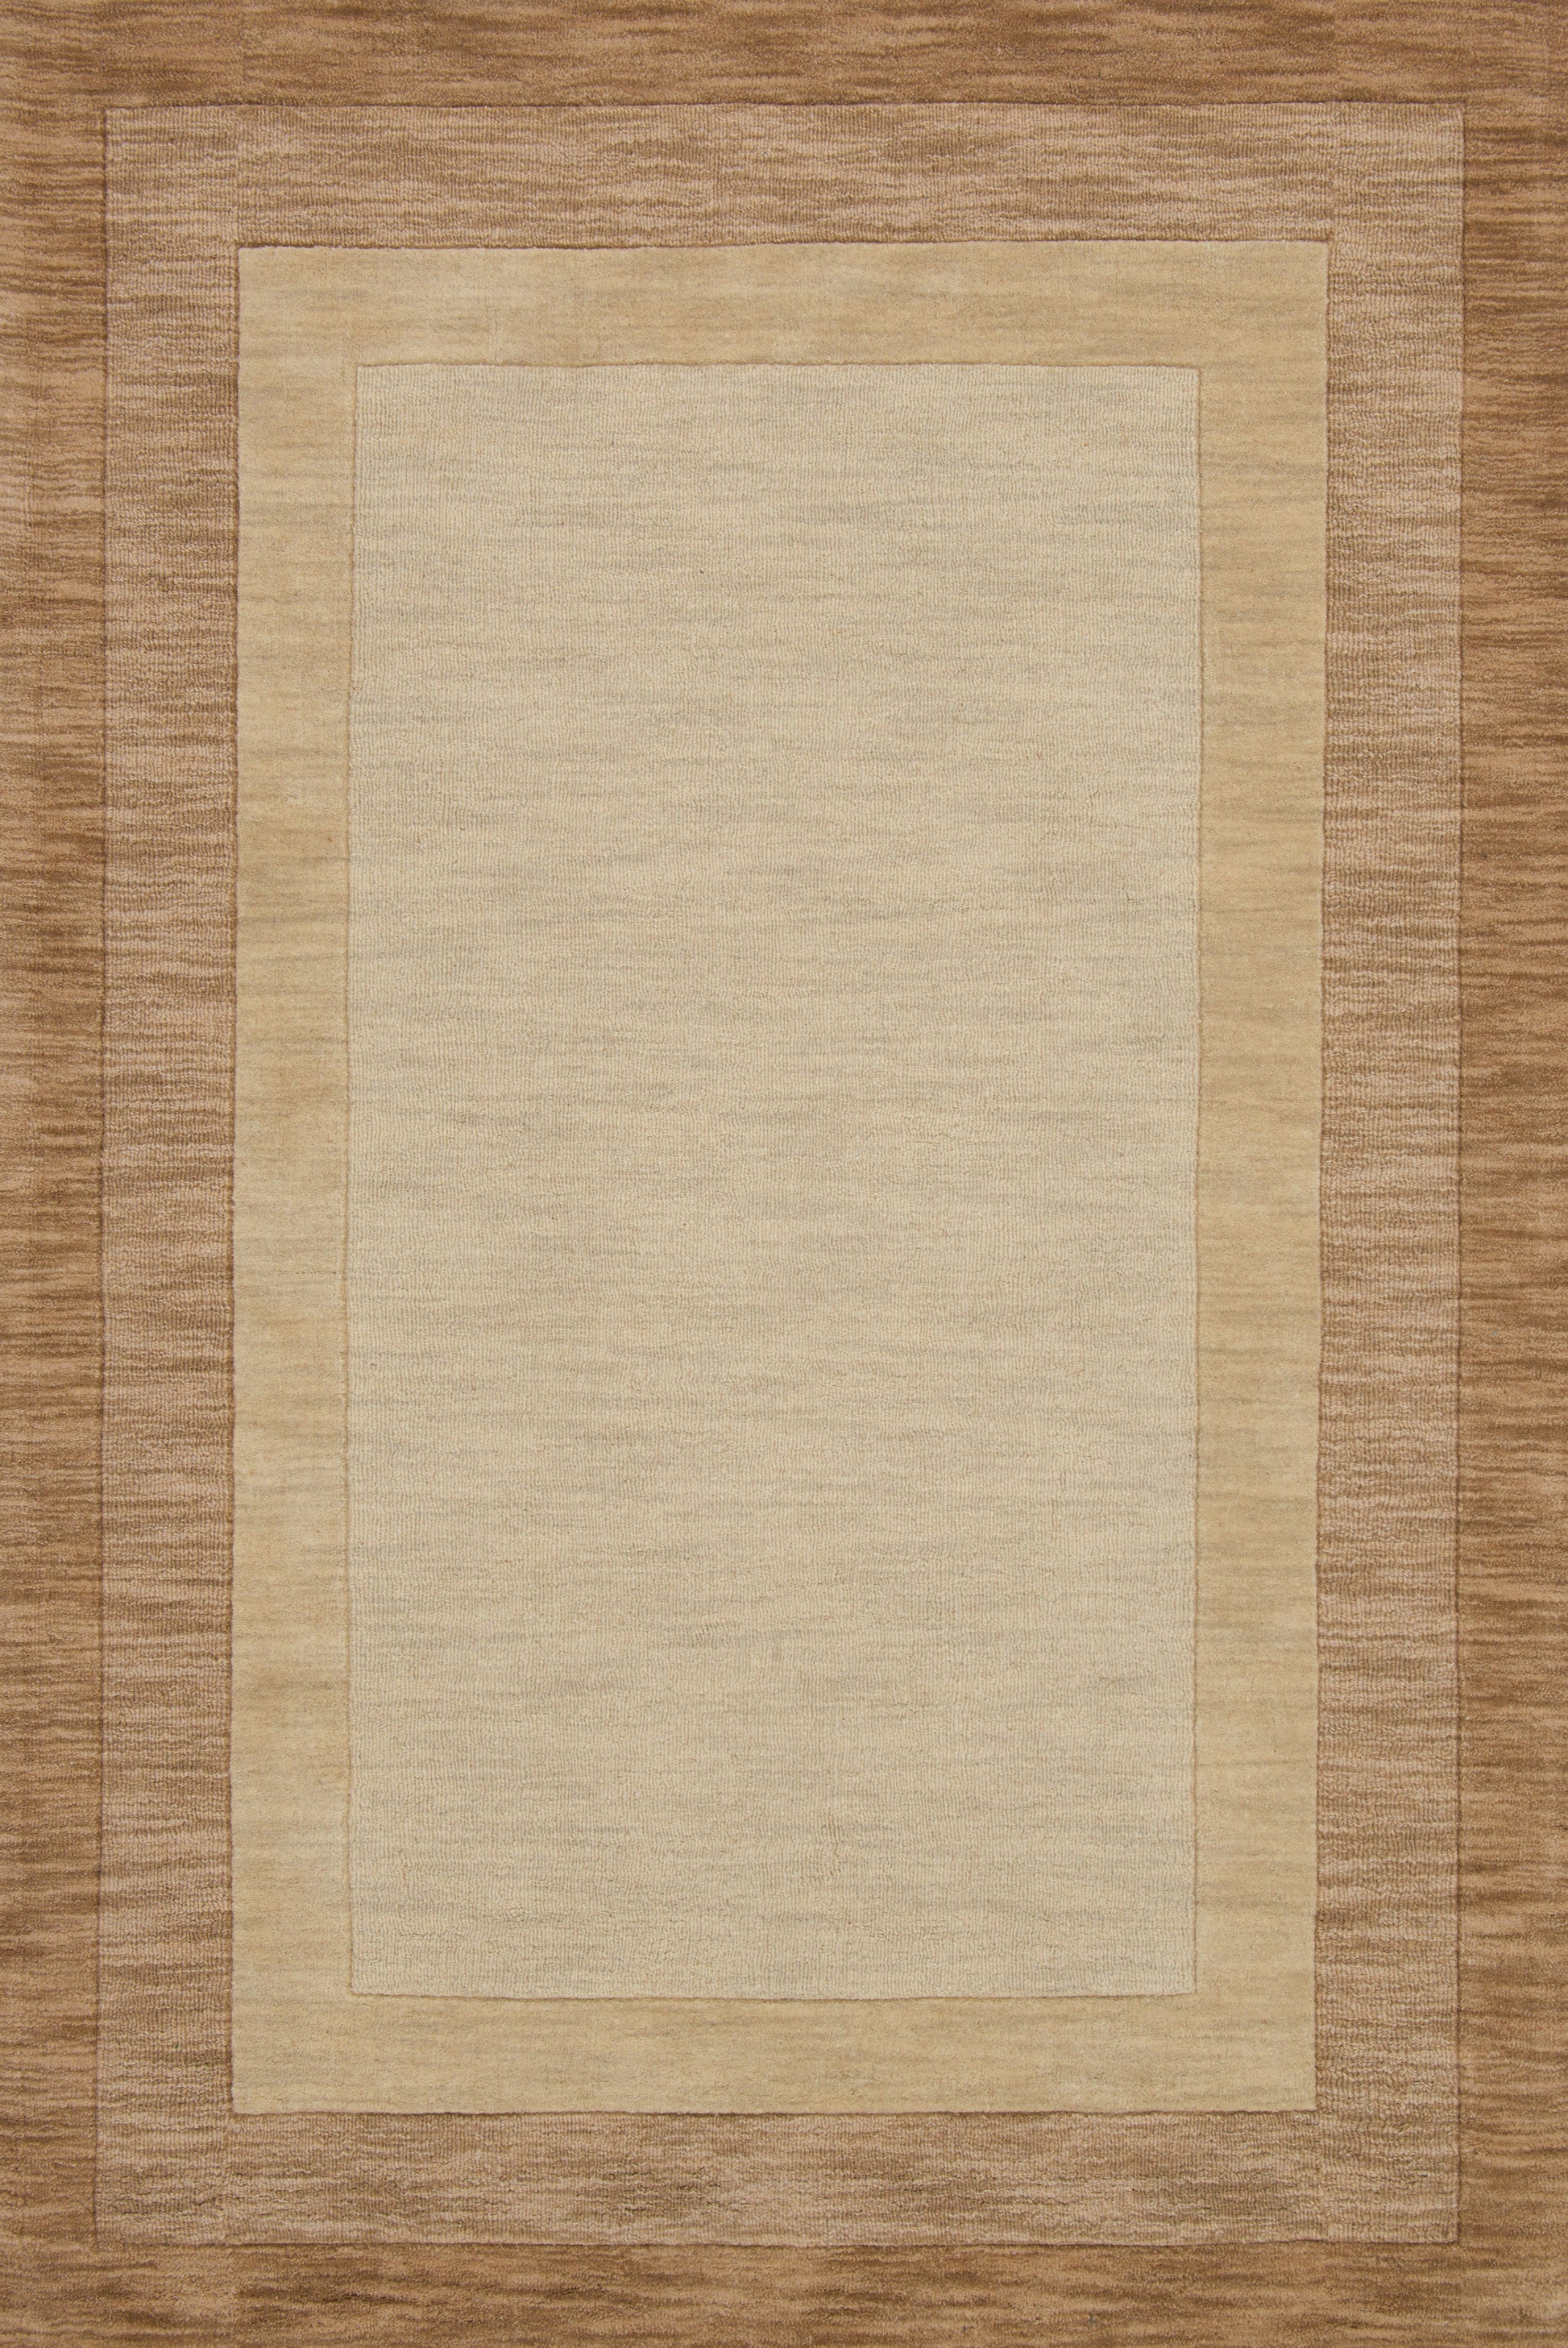 A picture of Loloi's Hamilton rug, in style HM-01, color Beige